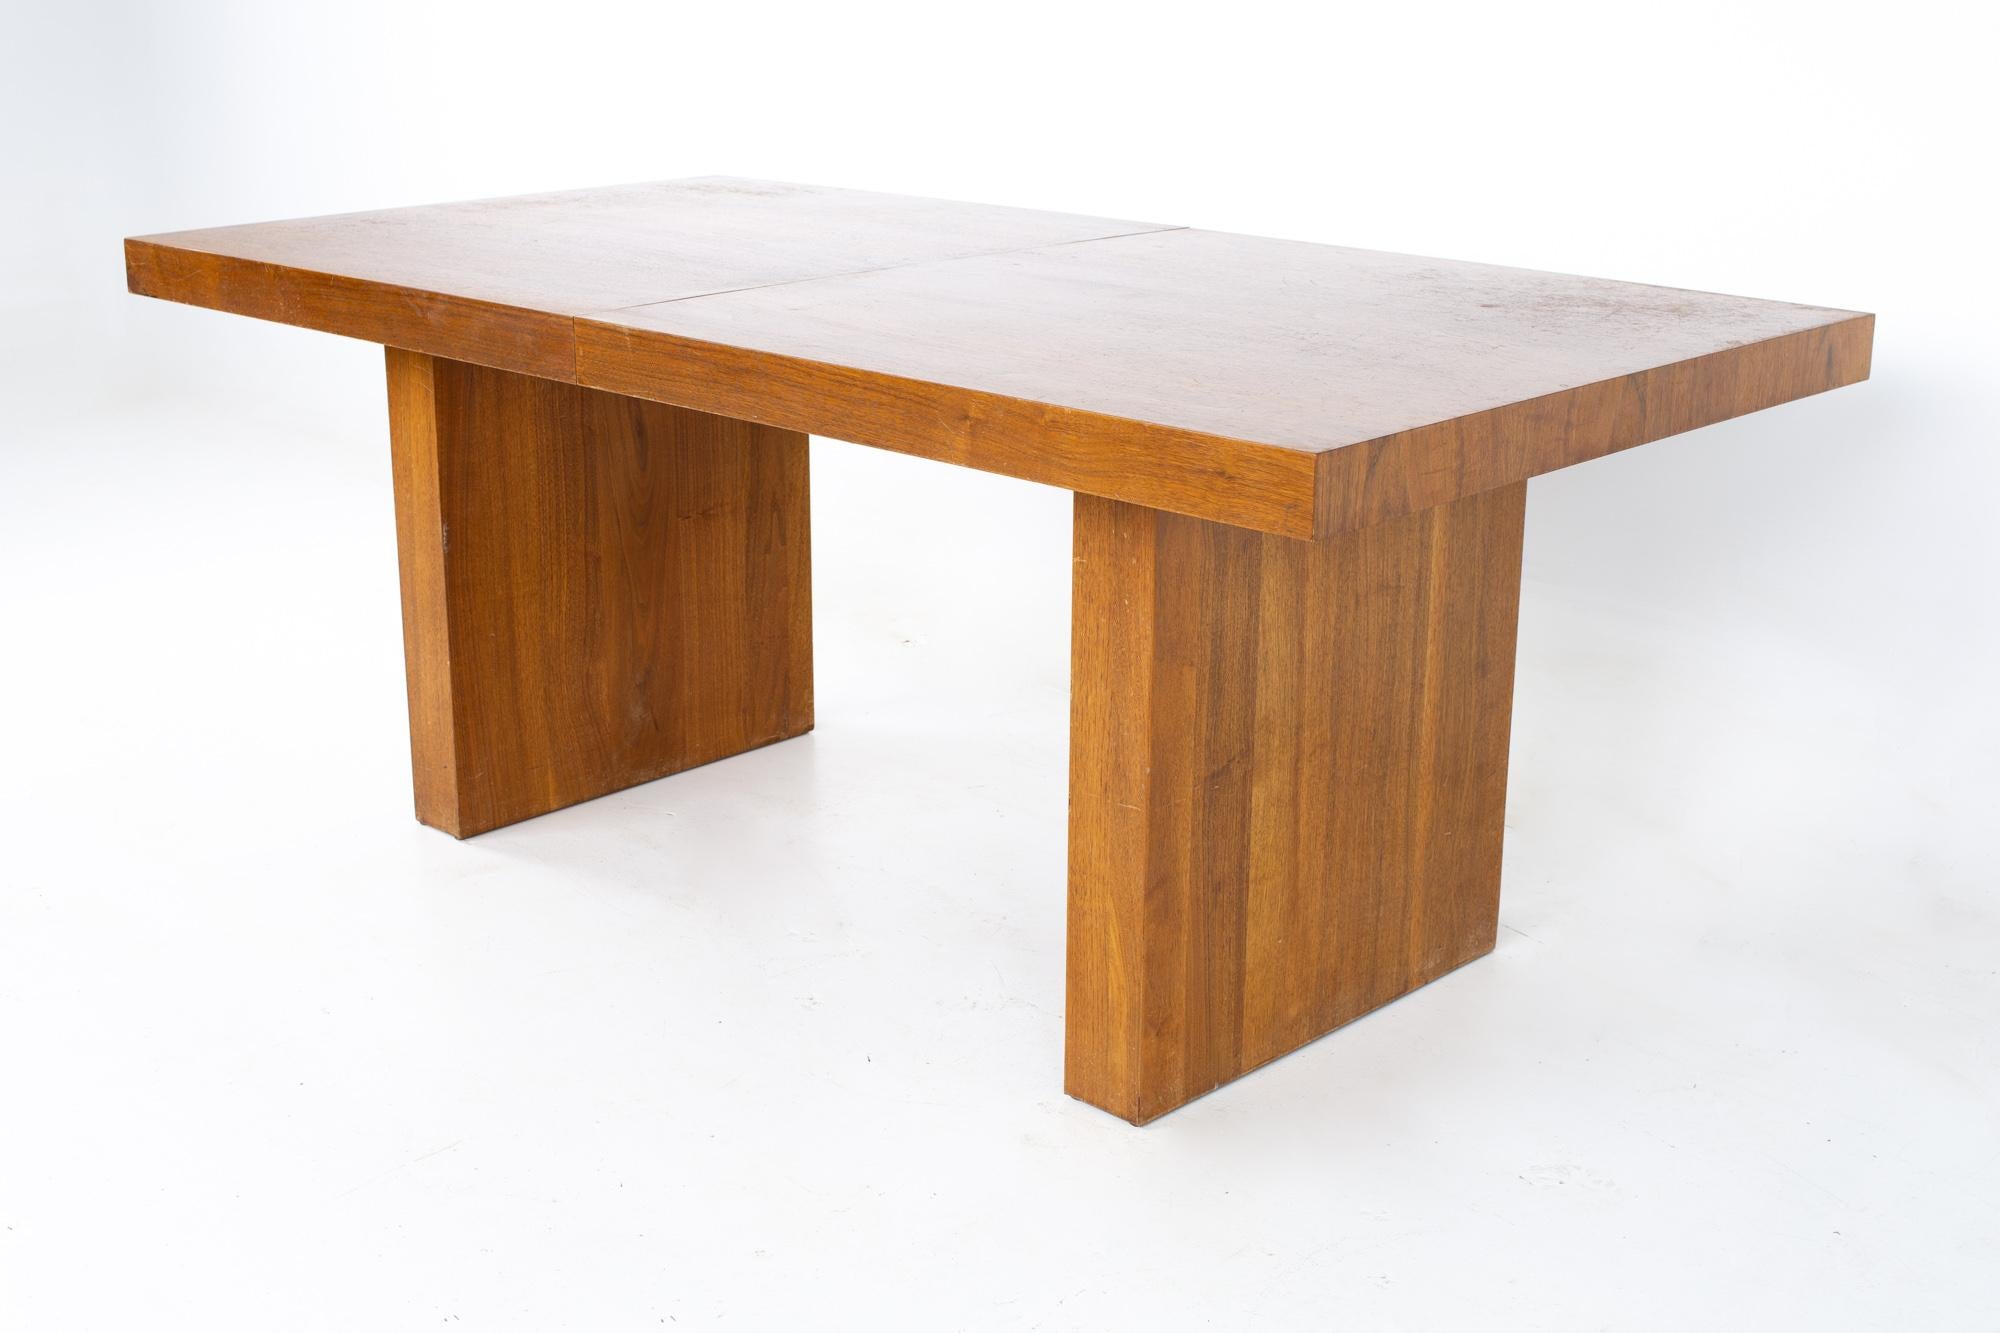 Dillingham mid century walnut pedestal expanding dining table
Table measures: 72 wide x 38 deep x 31 inches high; each leaf is 18 inches wide, making maximum table width of 108 inches when both leaves are used

All pieces of furniture can be had